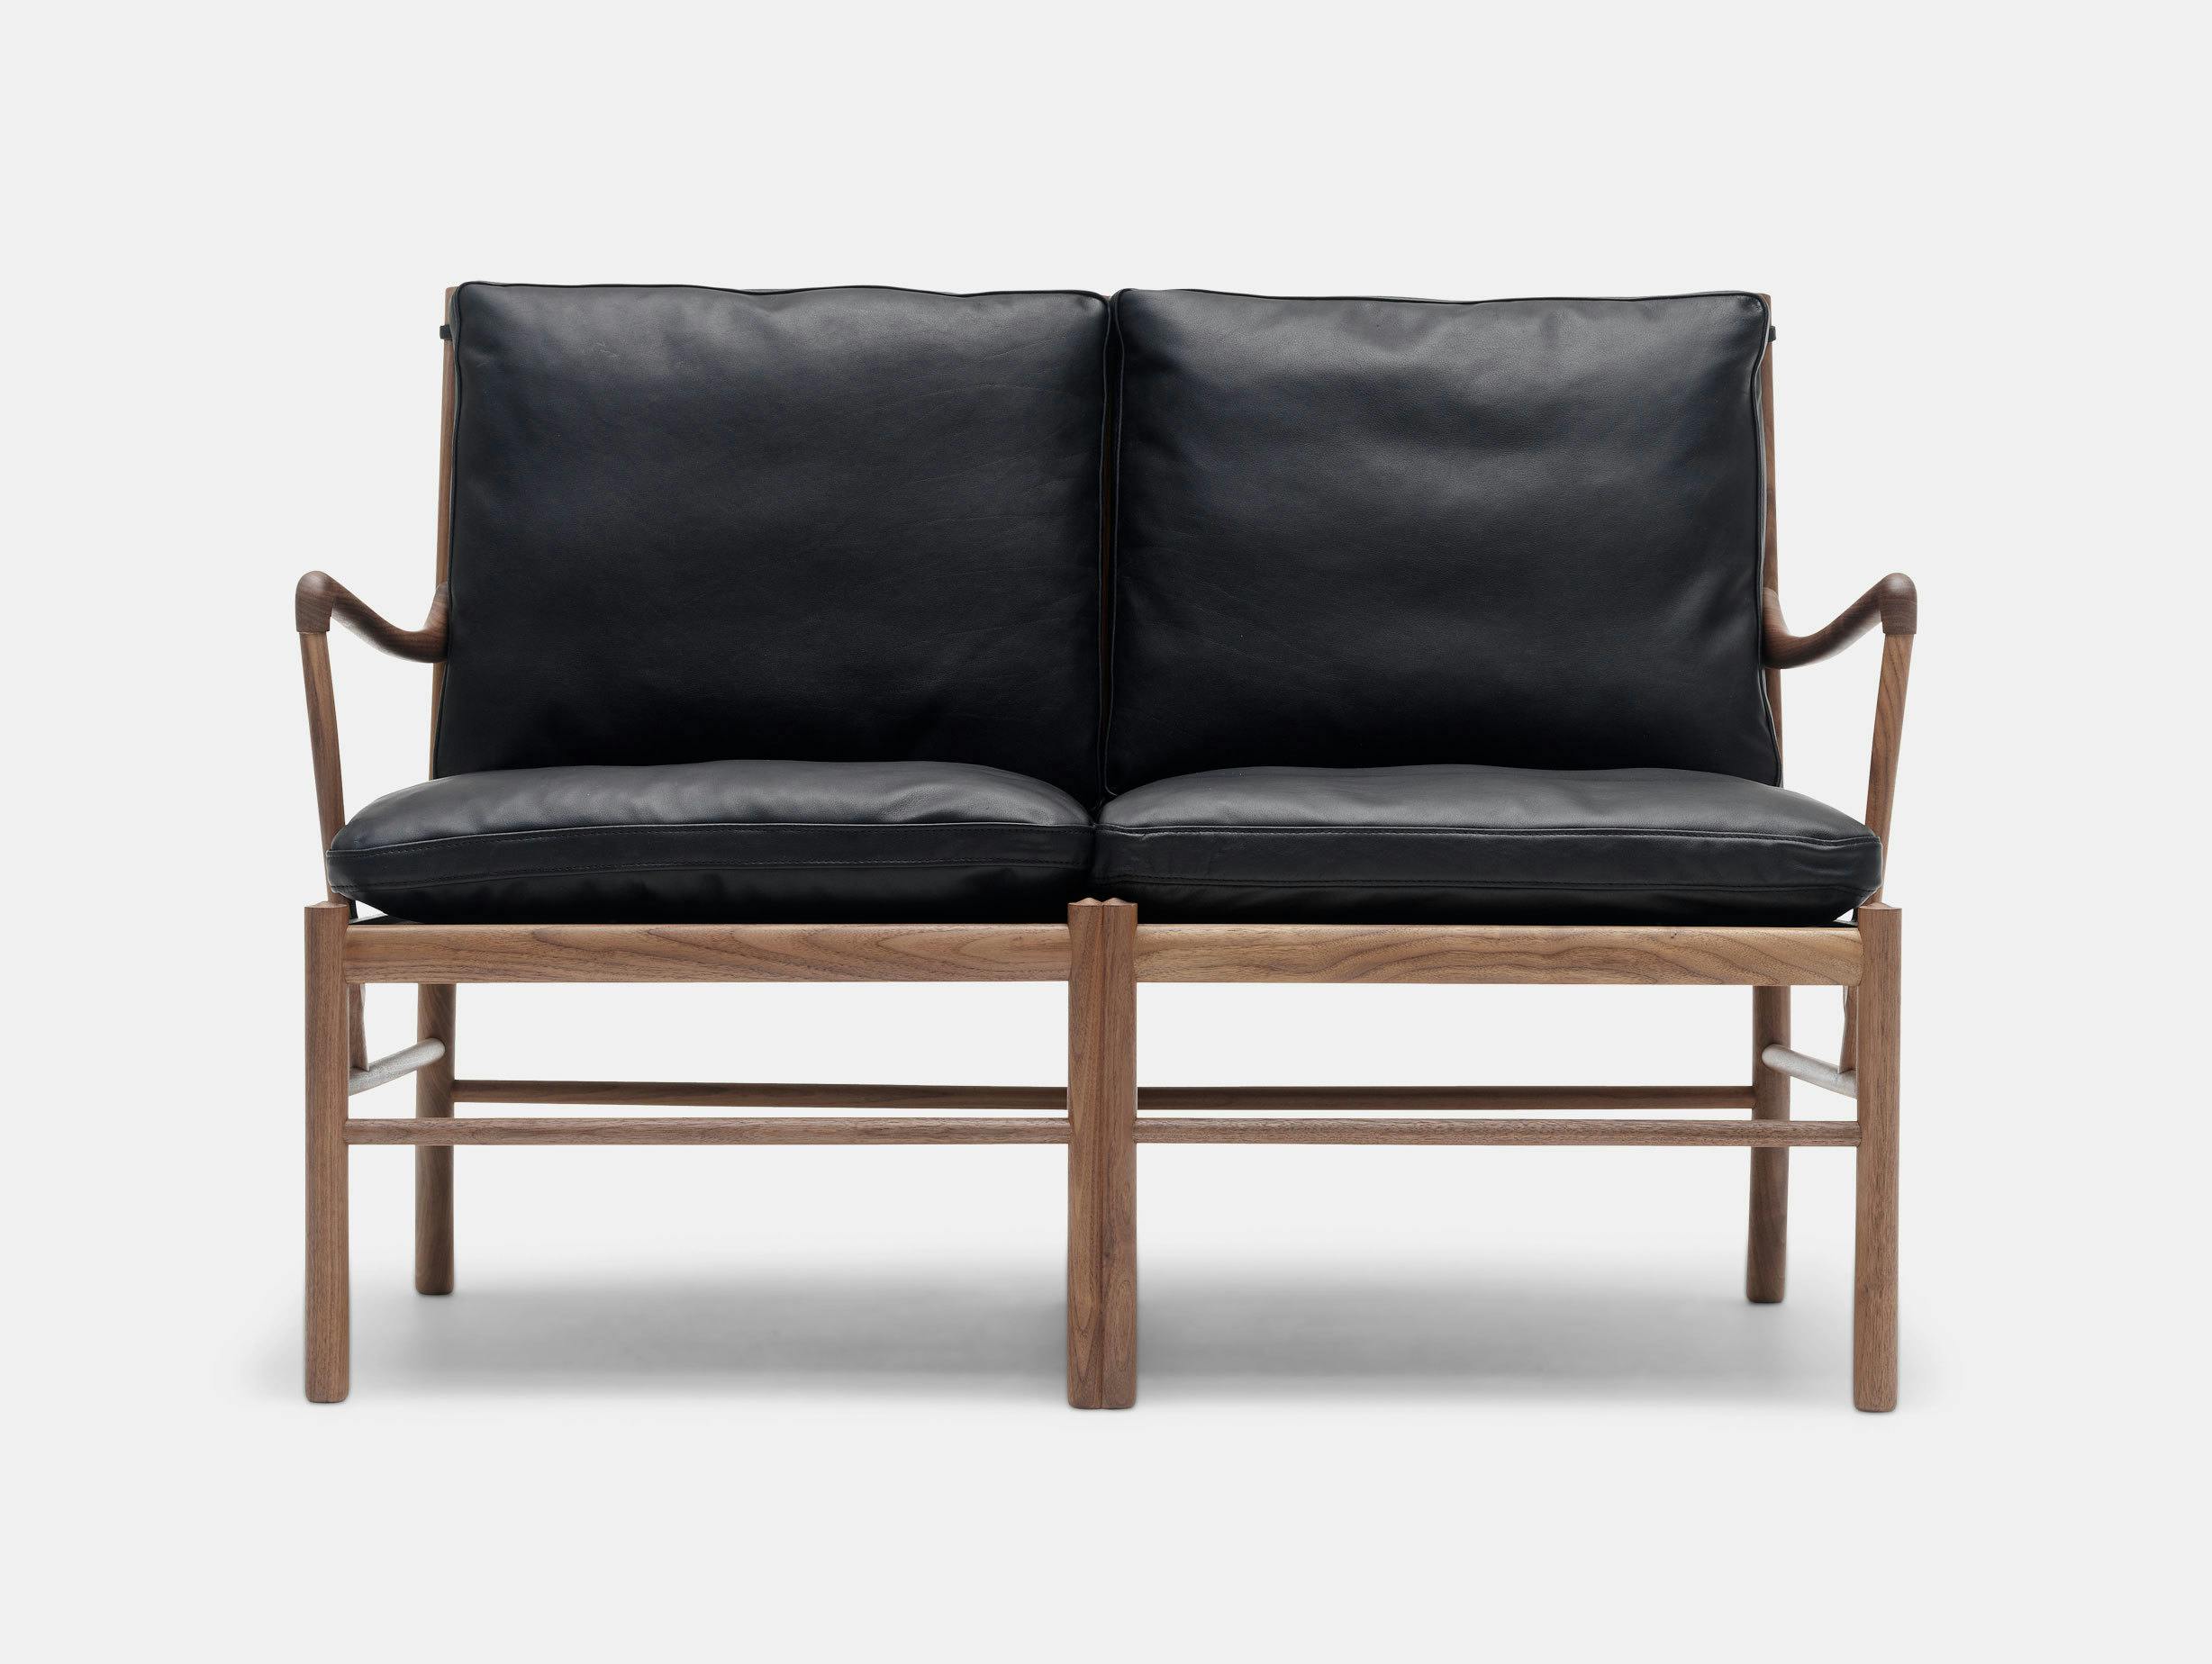 Carl Hansen Ow149 2 Colonial Sofa Walnut Black Leather Front Ole Wanscher